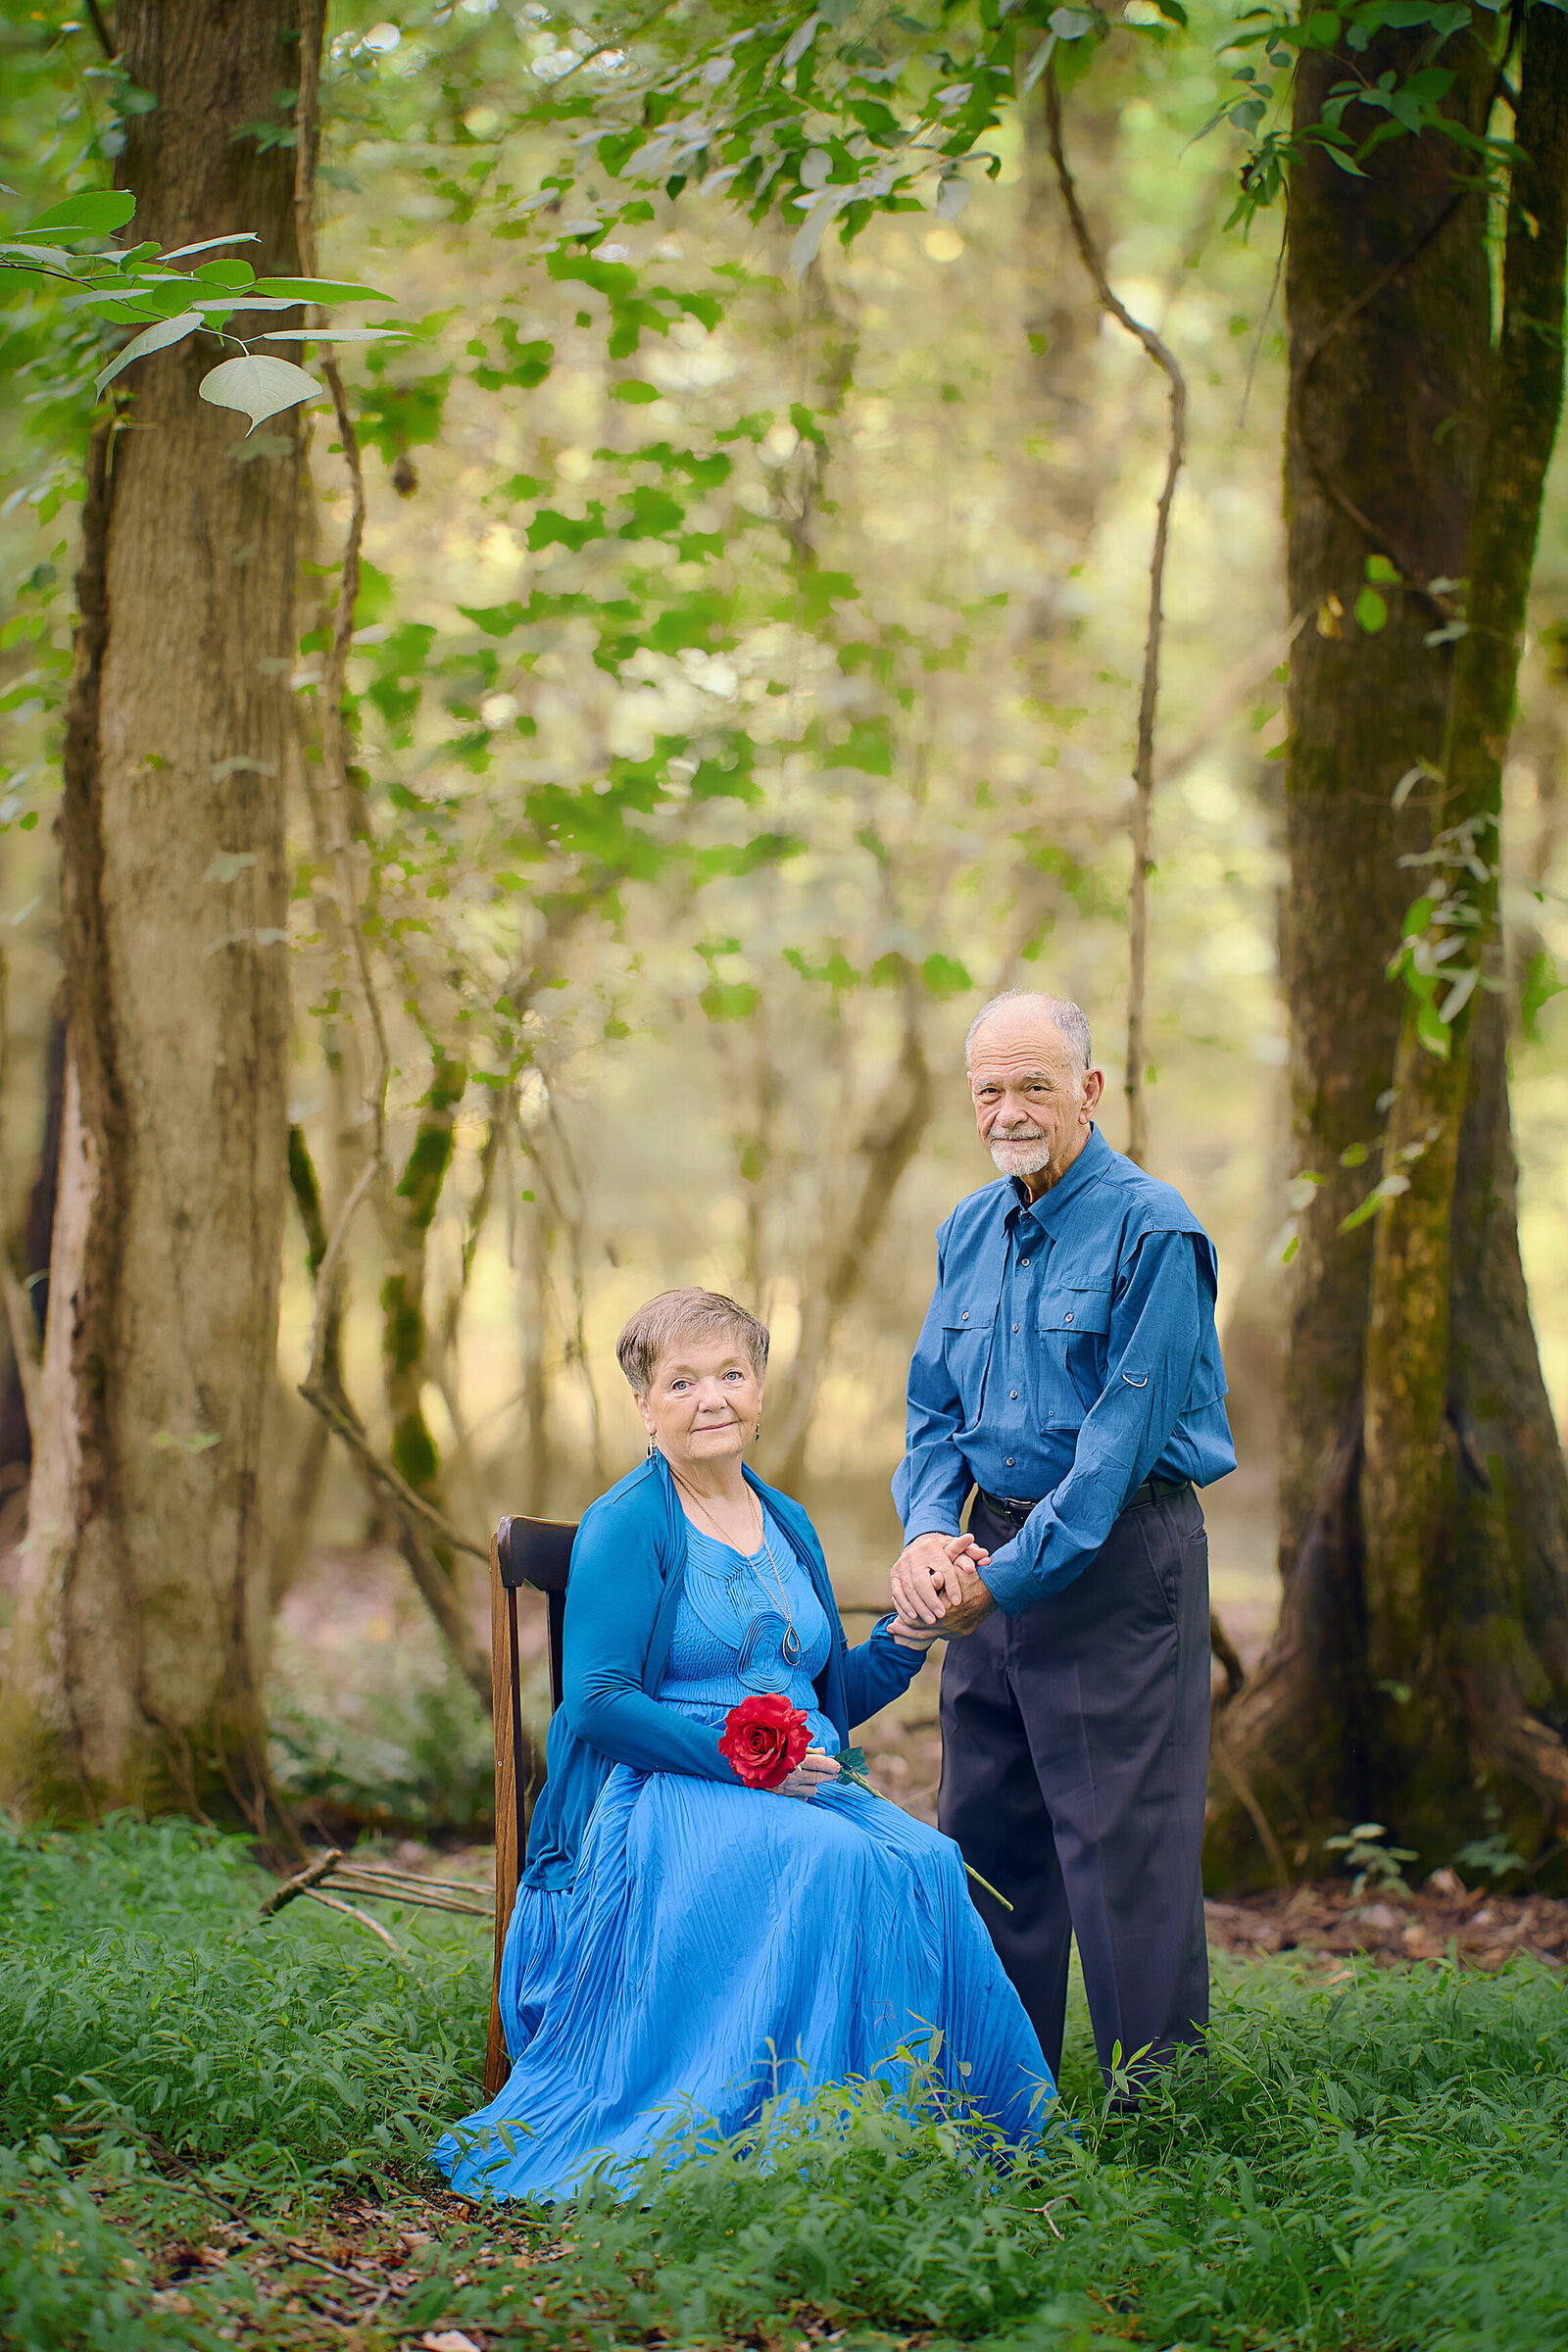 atlanta-best-award-winning-family-portrait-outdoor-spring-fall-woods-50th-anniversary-husband-wife-elderly-photoshoot-photography-photographer-twin-rivers-02